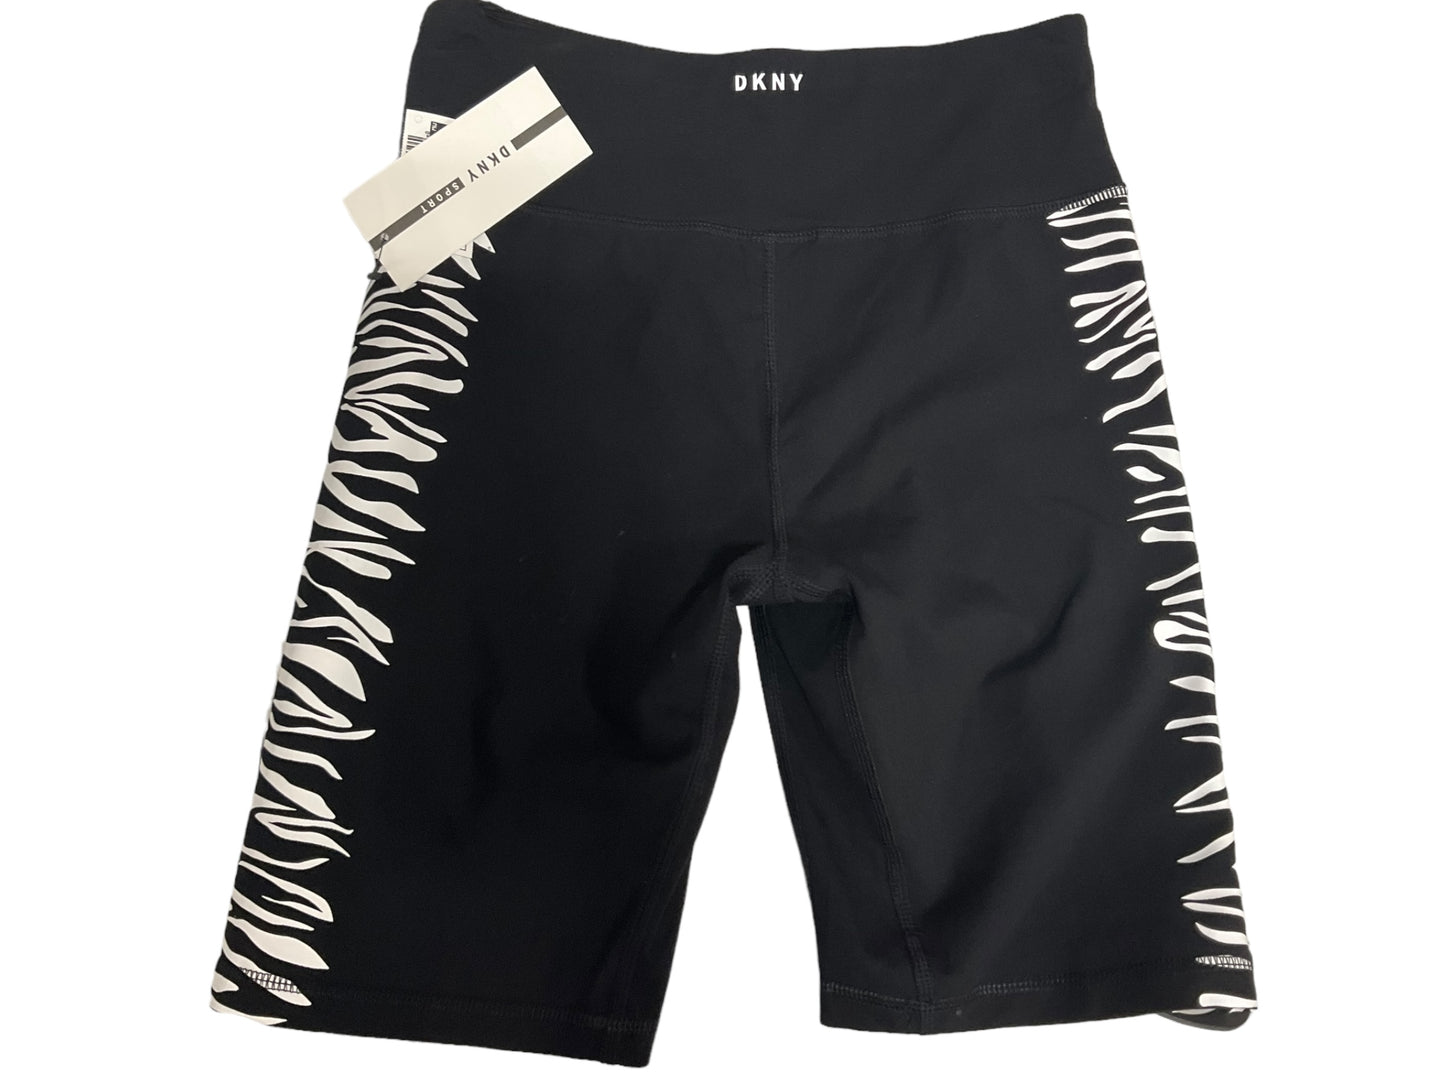 Athletic Shorts By Dkny  Size: S